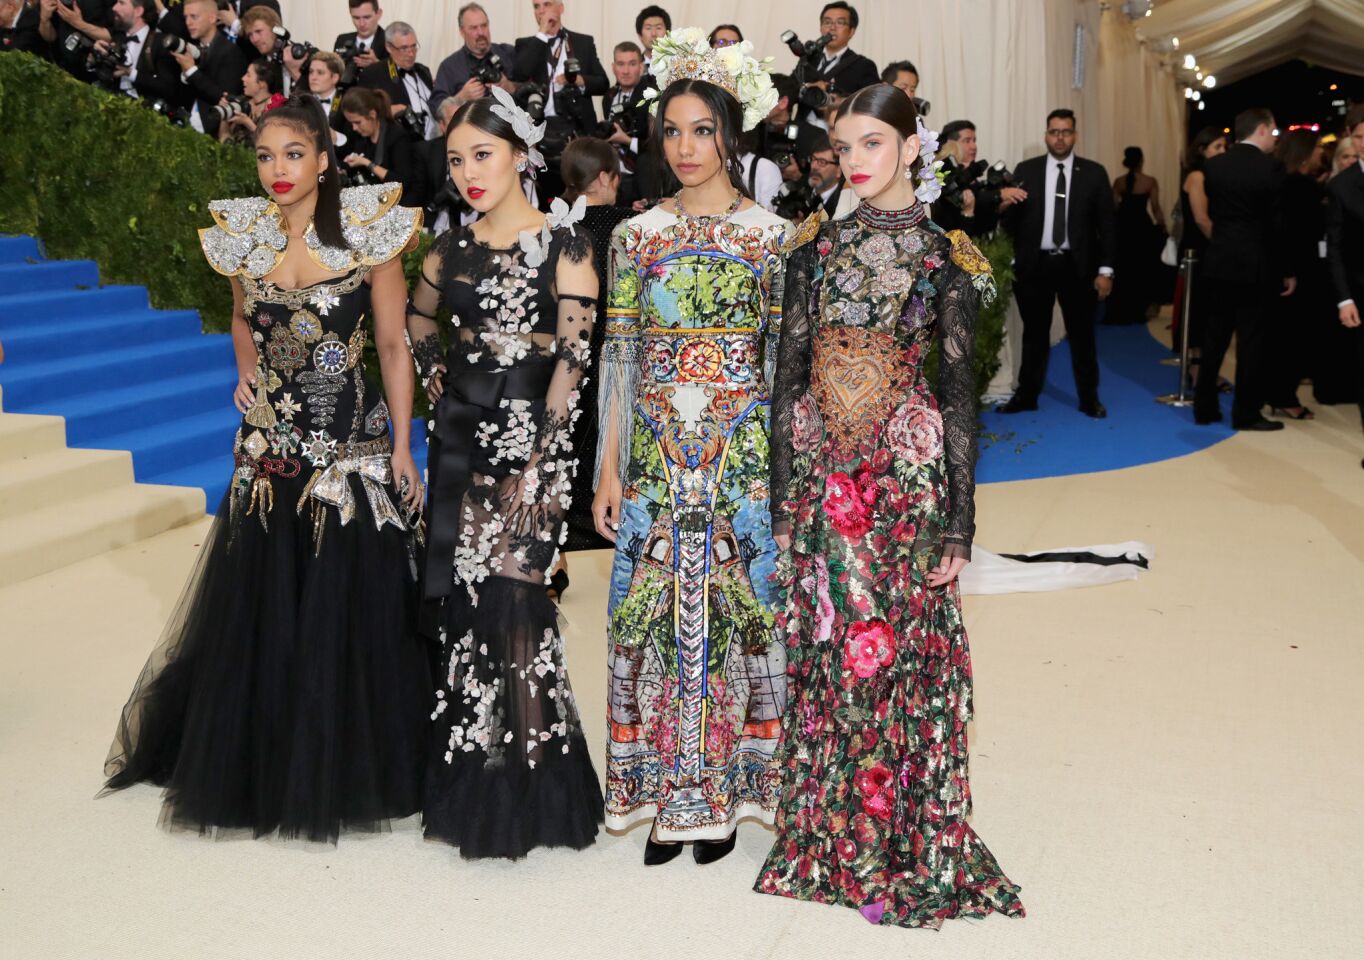 From left, Lori Harvey, guest, Corinne Foxx and Sonia Ben Ammar attend the Met Gala.